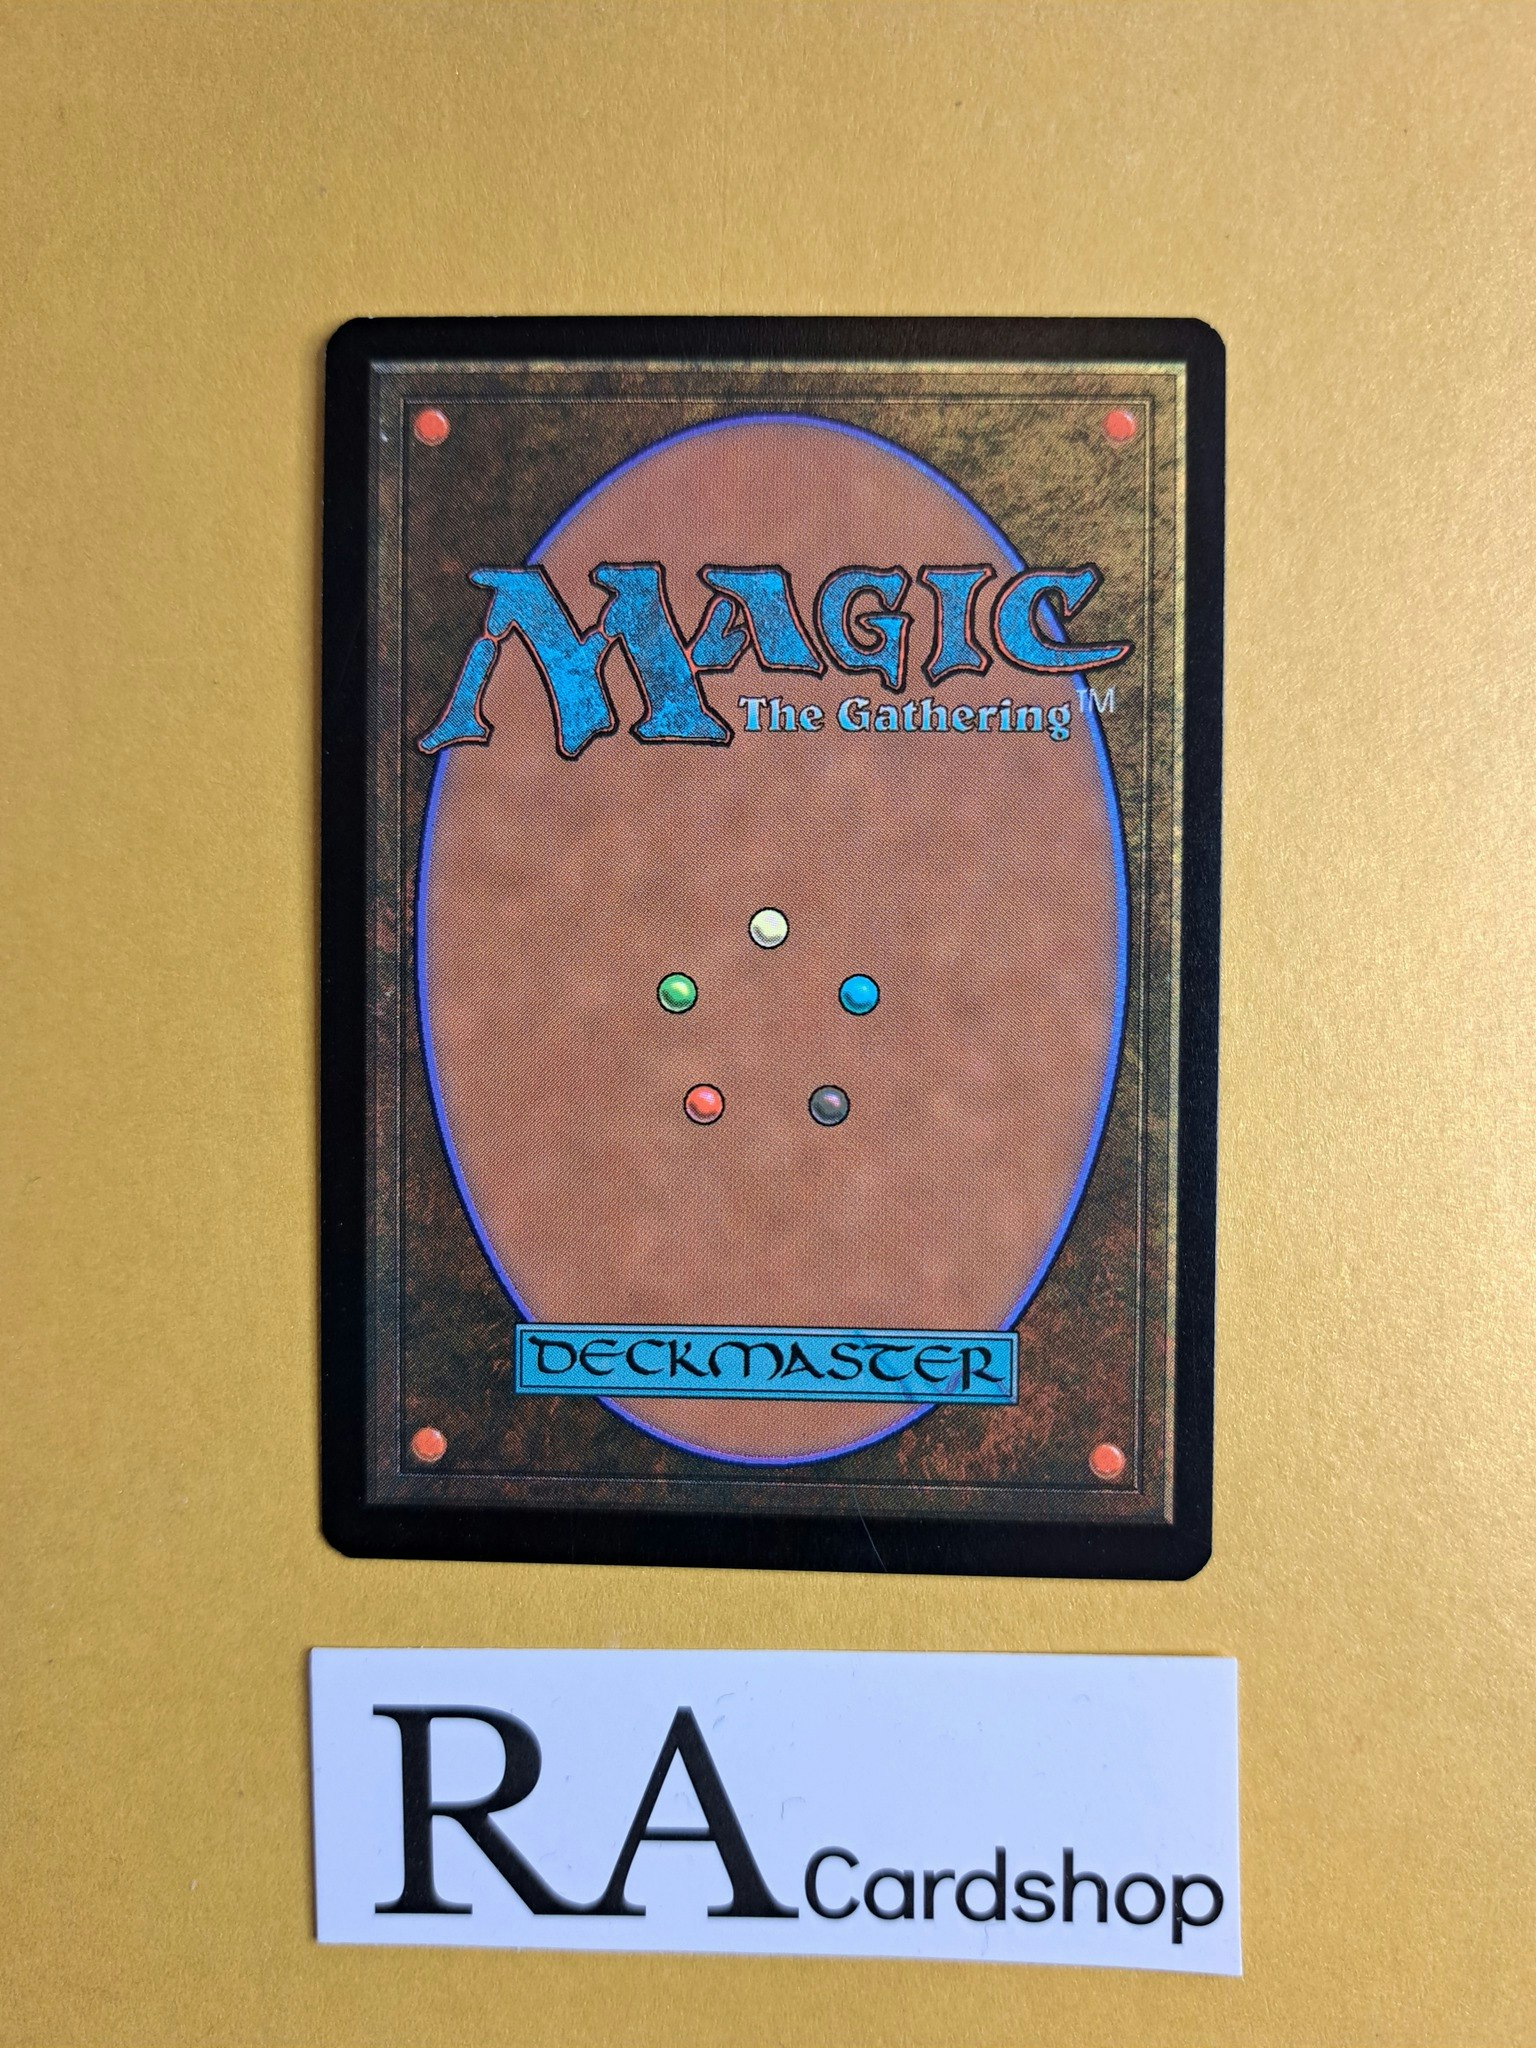 Air Marshal Common 043/287 The Brothers War Magic the Gathering